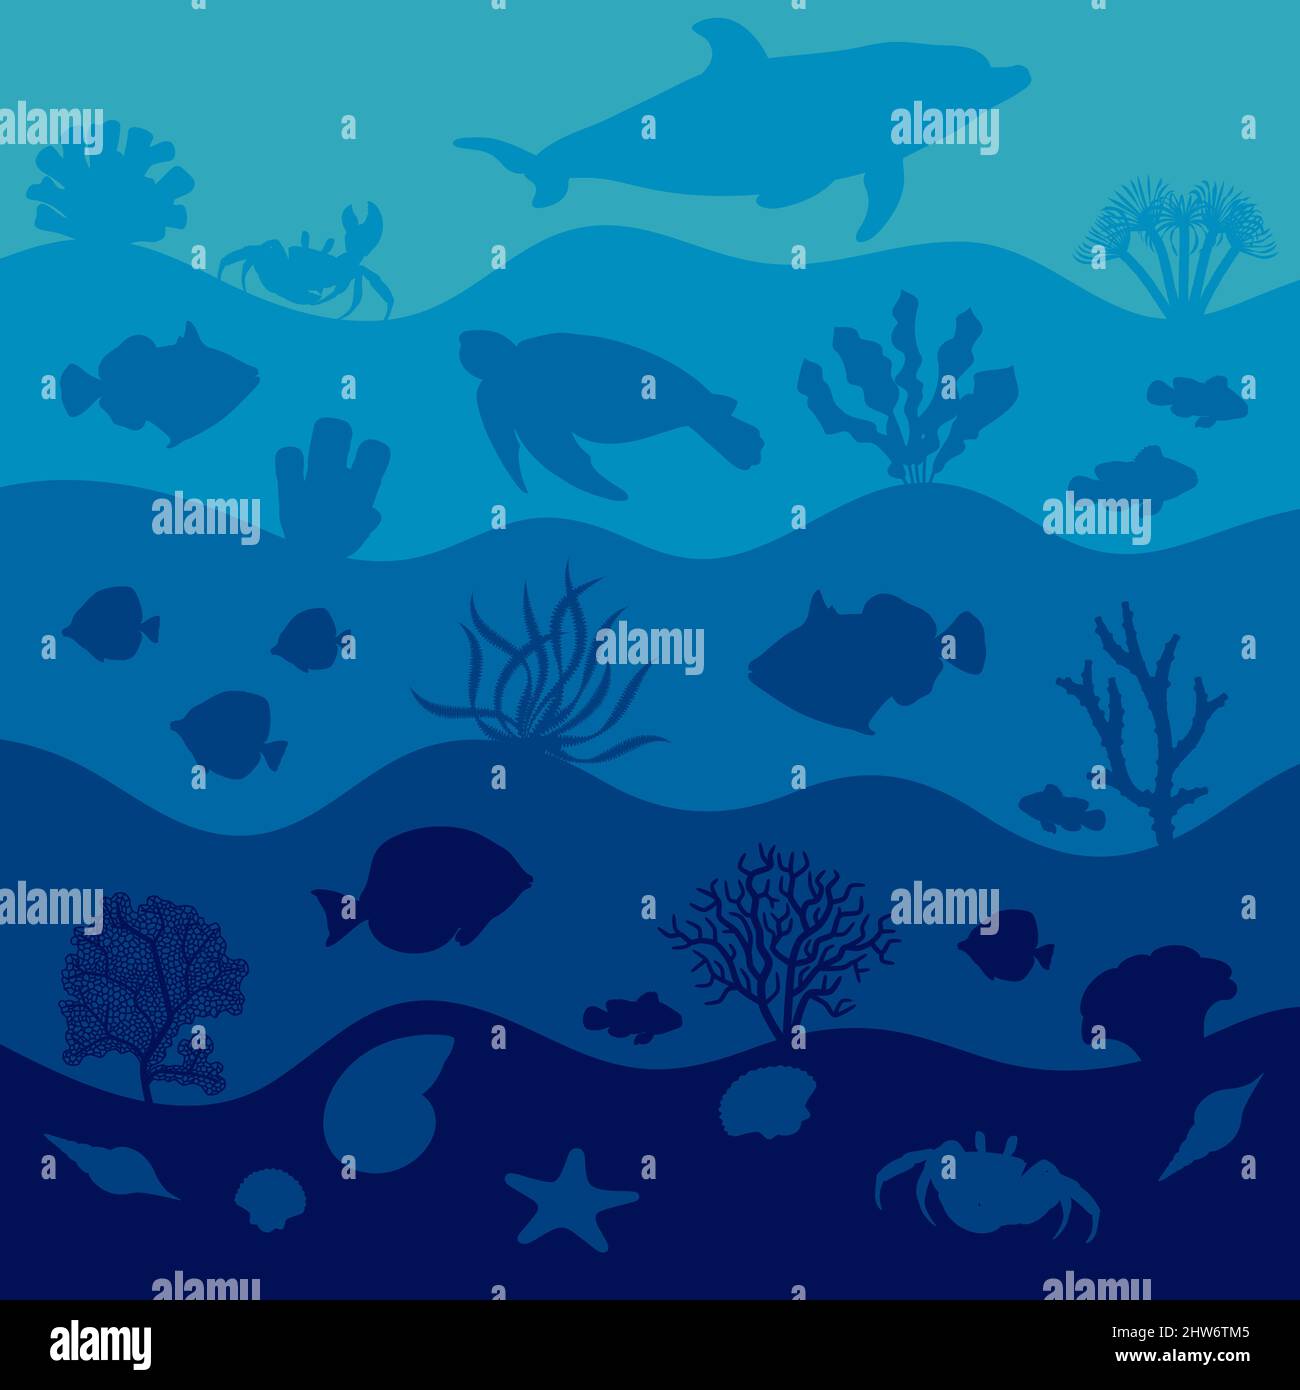 Underwater illustration with animals, fish and corals. Marine vector background. Stock Vector